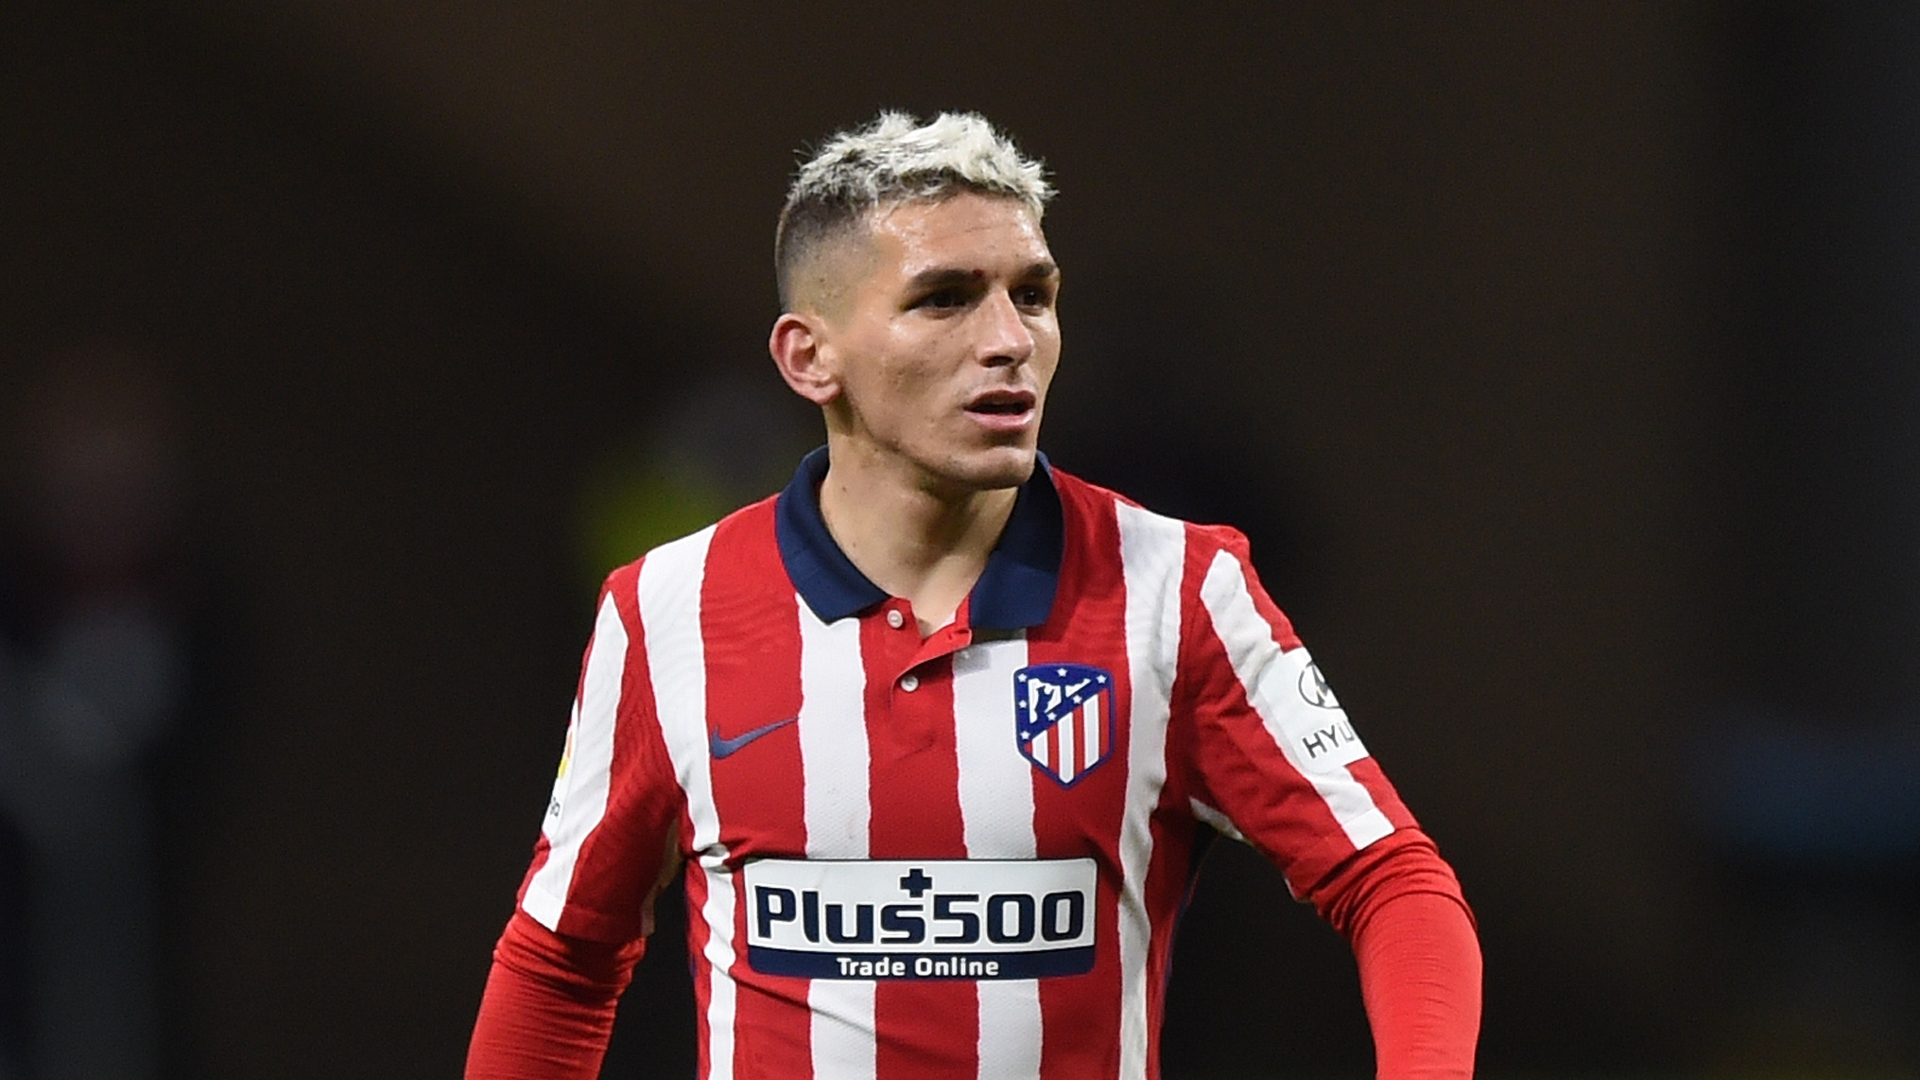 Atlético Madrid poised to sign, loan out young Uruguayan center